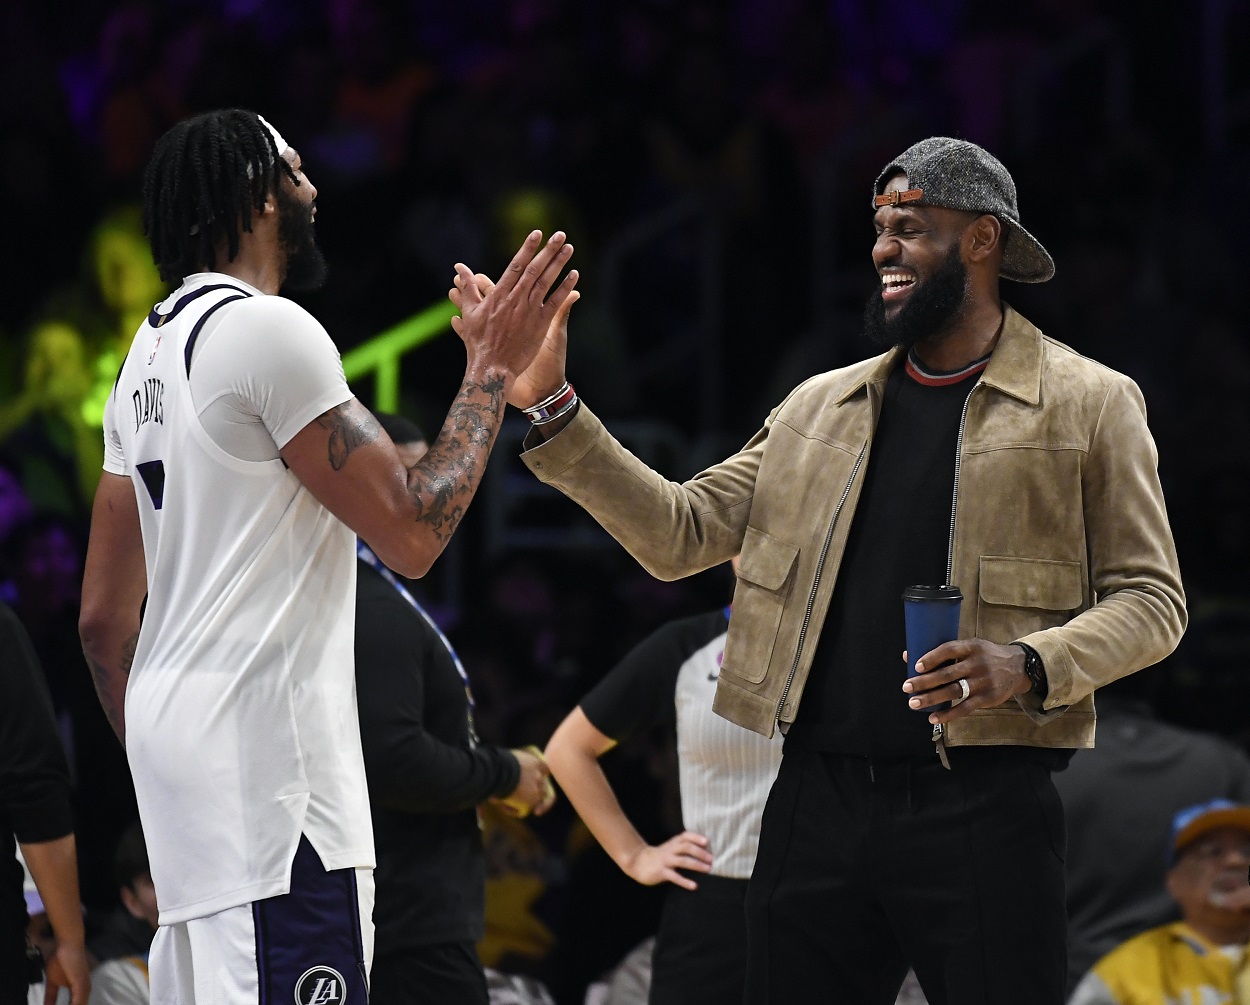 How Close Is LeBron James to Kareem Abdul-Jabbar’s All-Time NBA Scoring Record Following the Lakers’ Win Over the Nets?